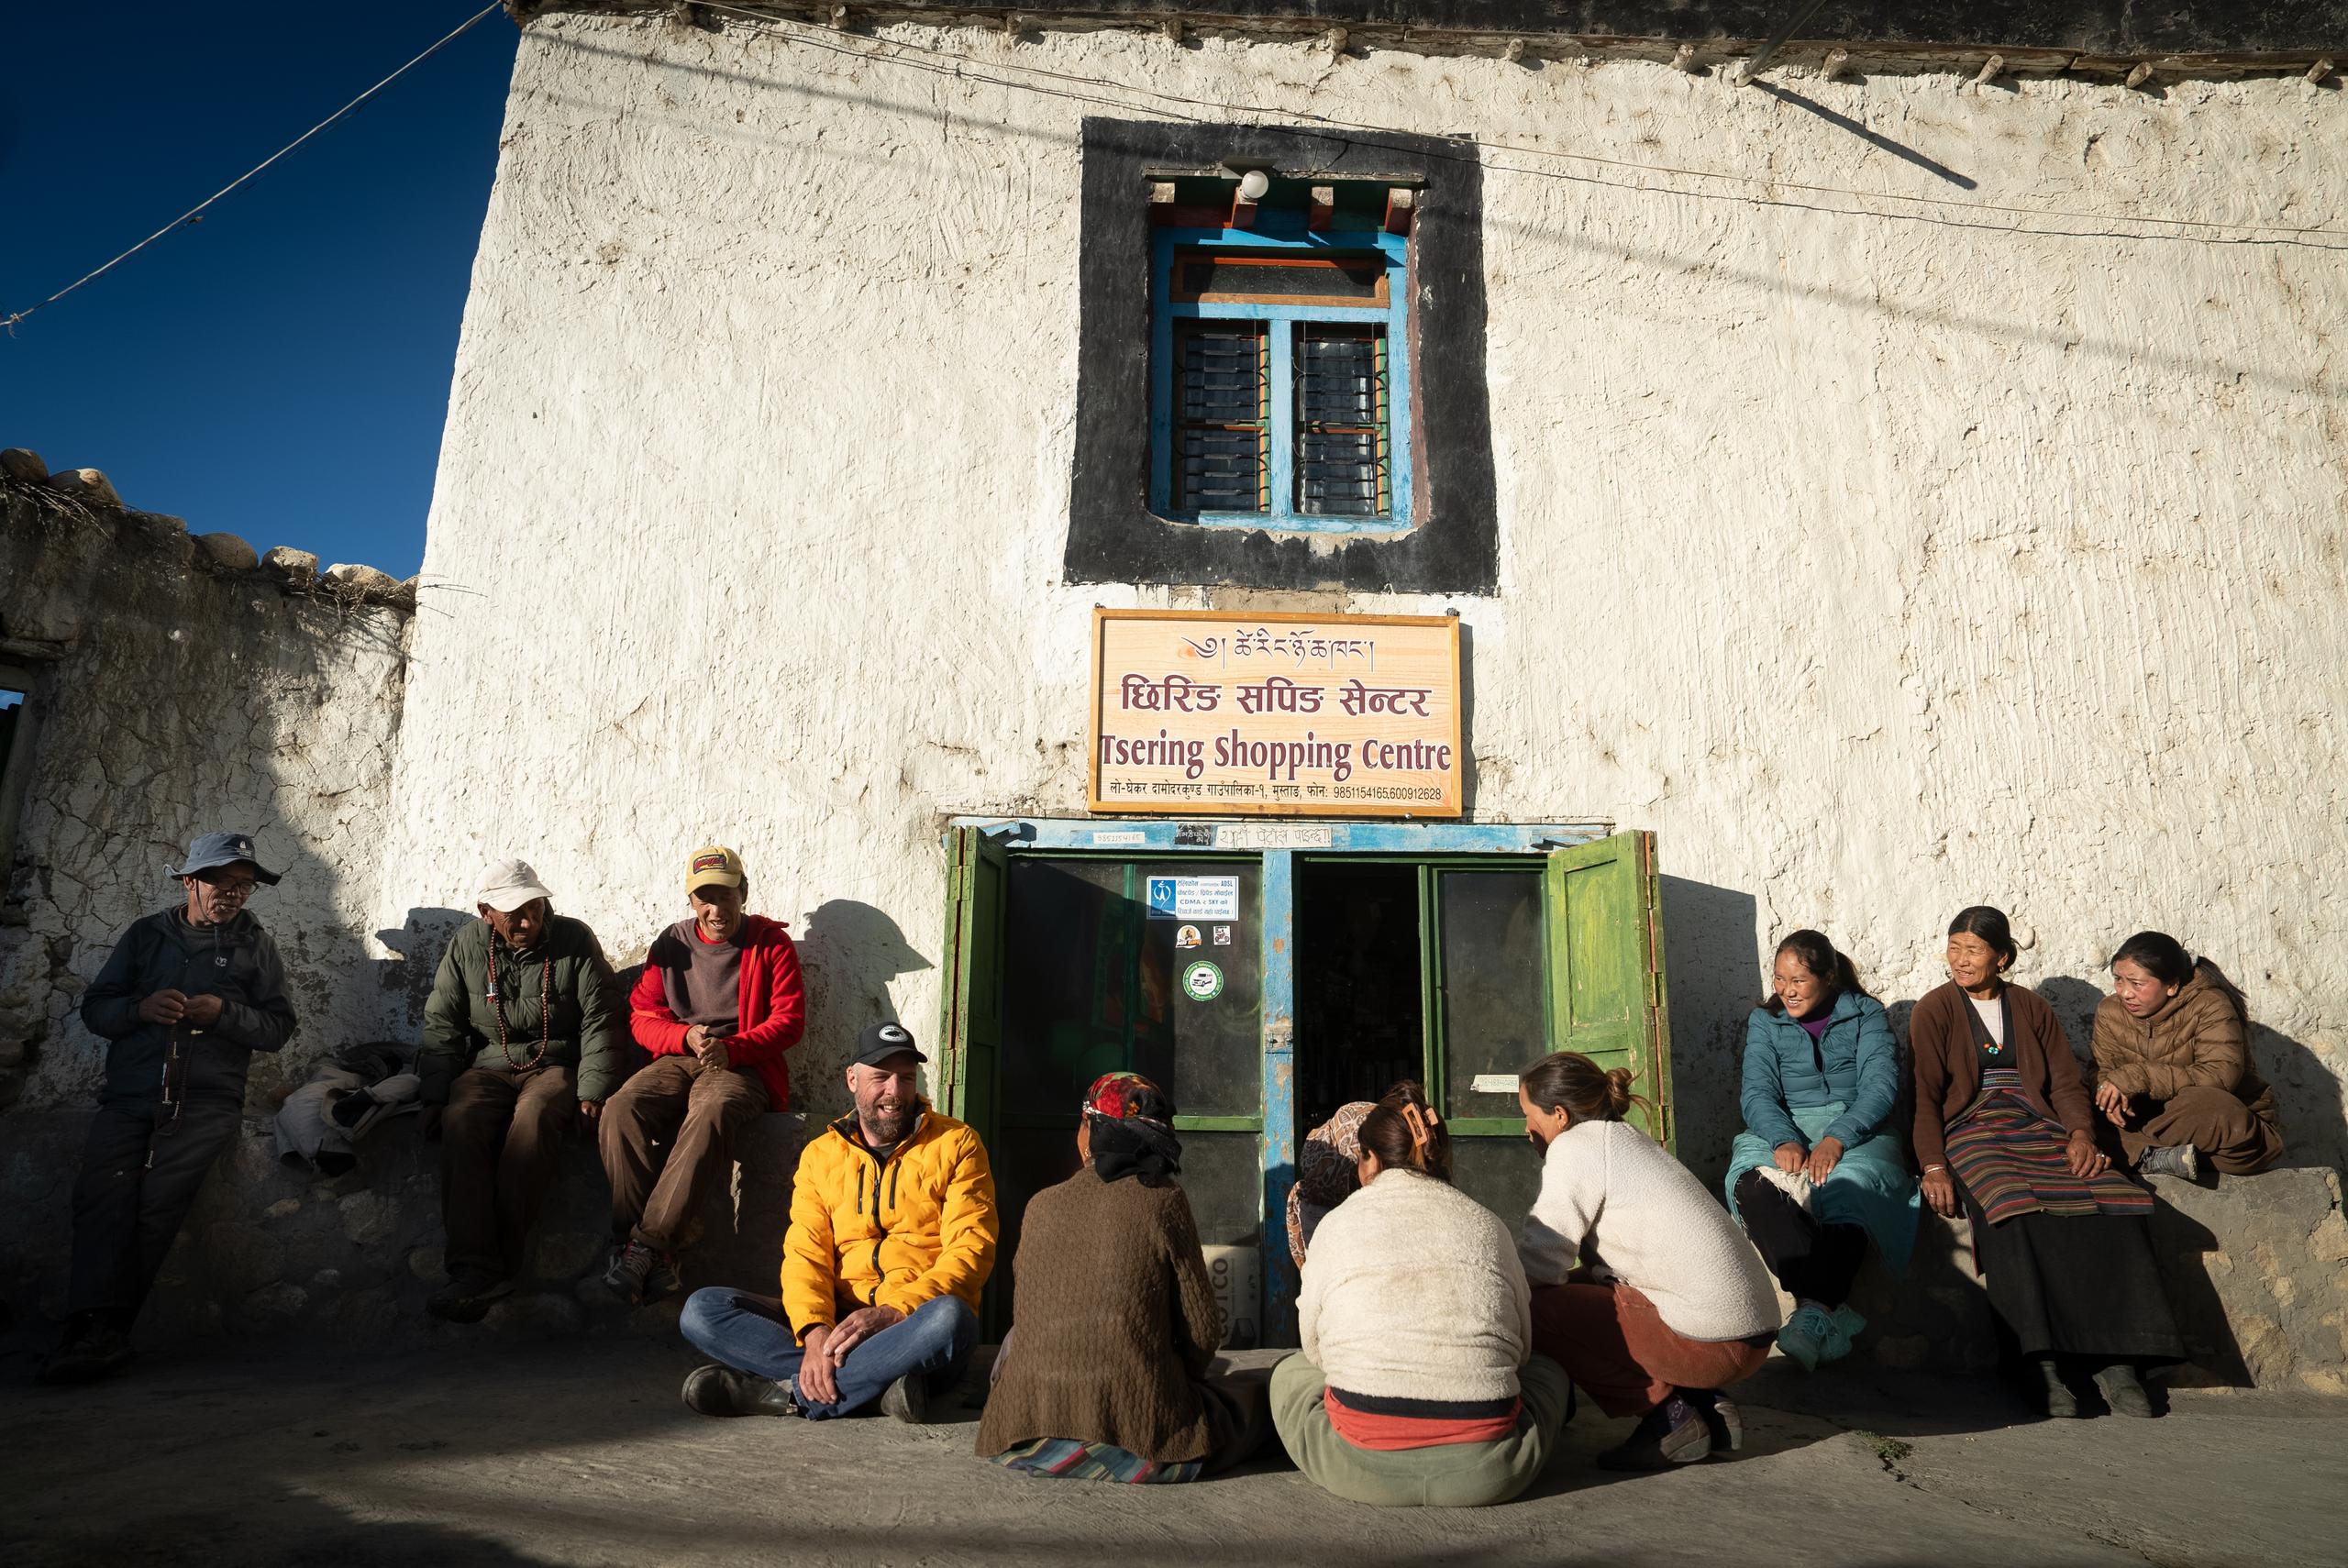 Traveler sitting on ground along with 9 locals in front of small shop in northern Nepal